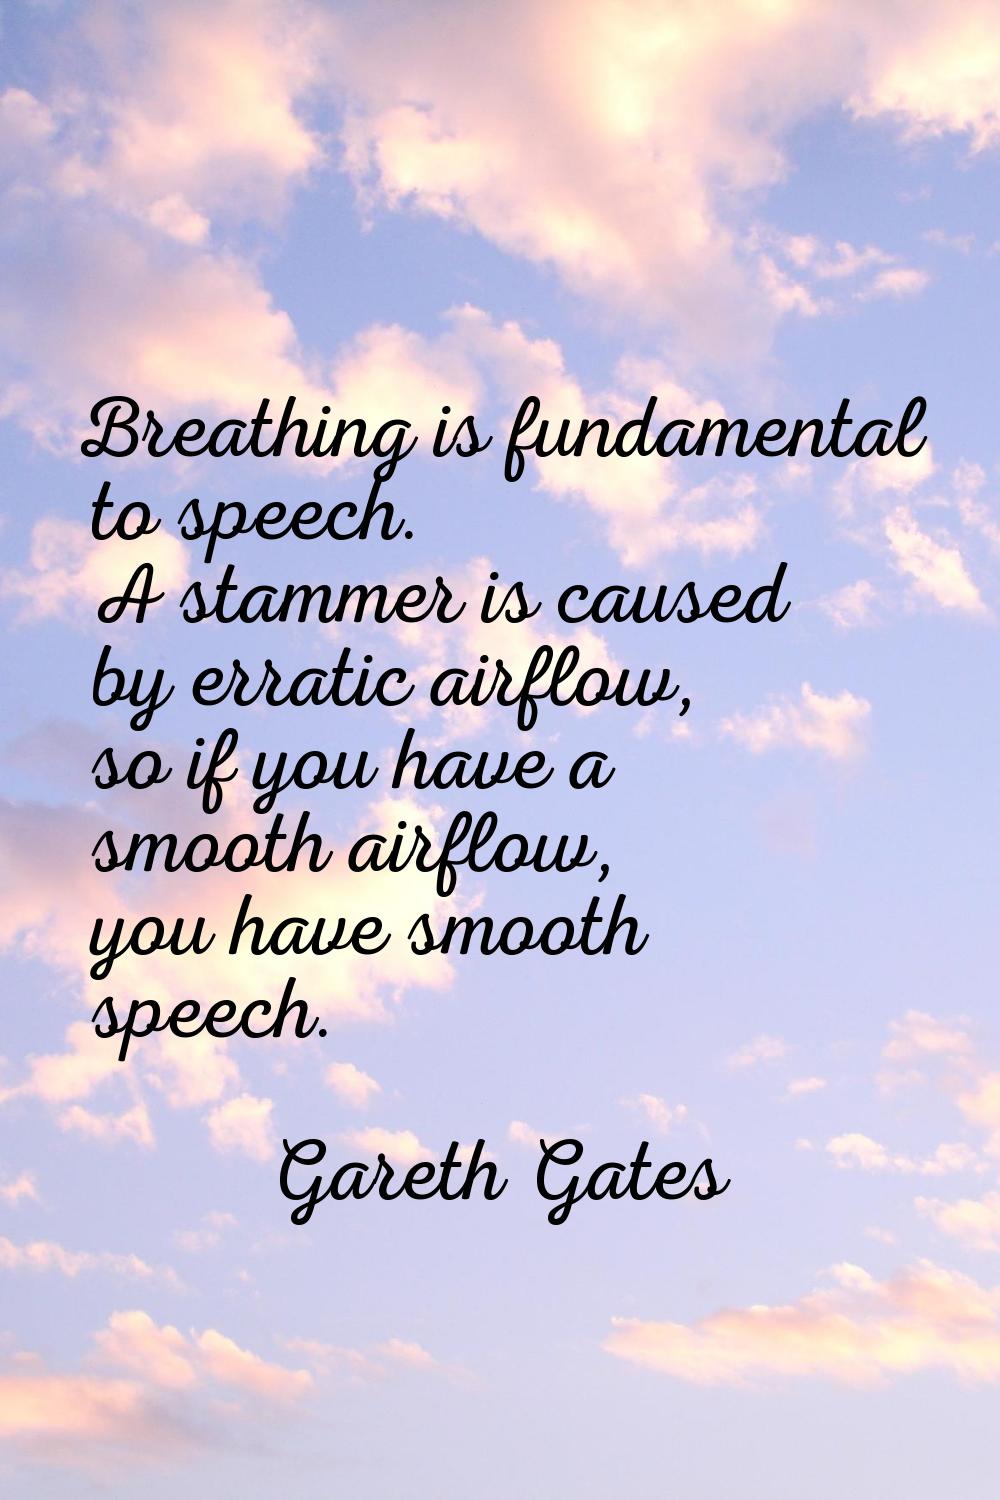 Breathing is fundamental to speech. A stammer is caused by erratic airflow, so if you have a smooth